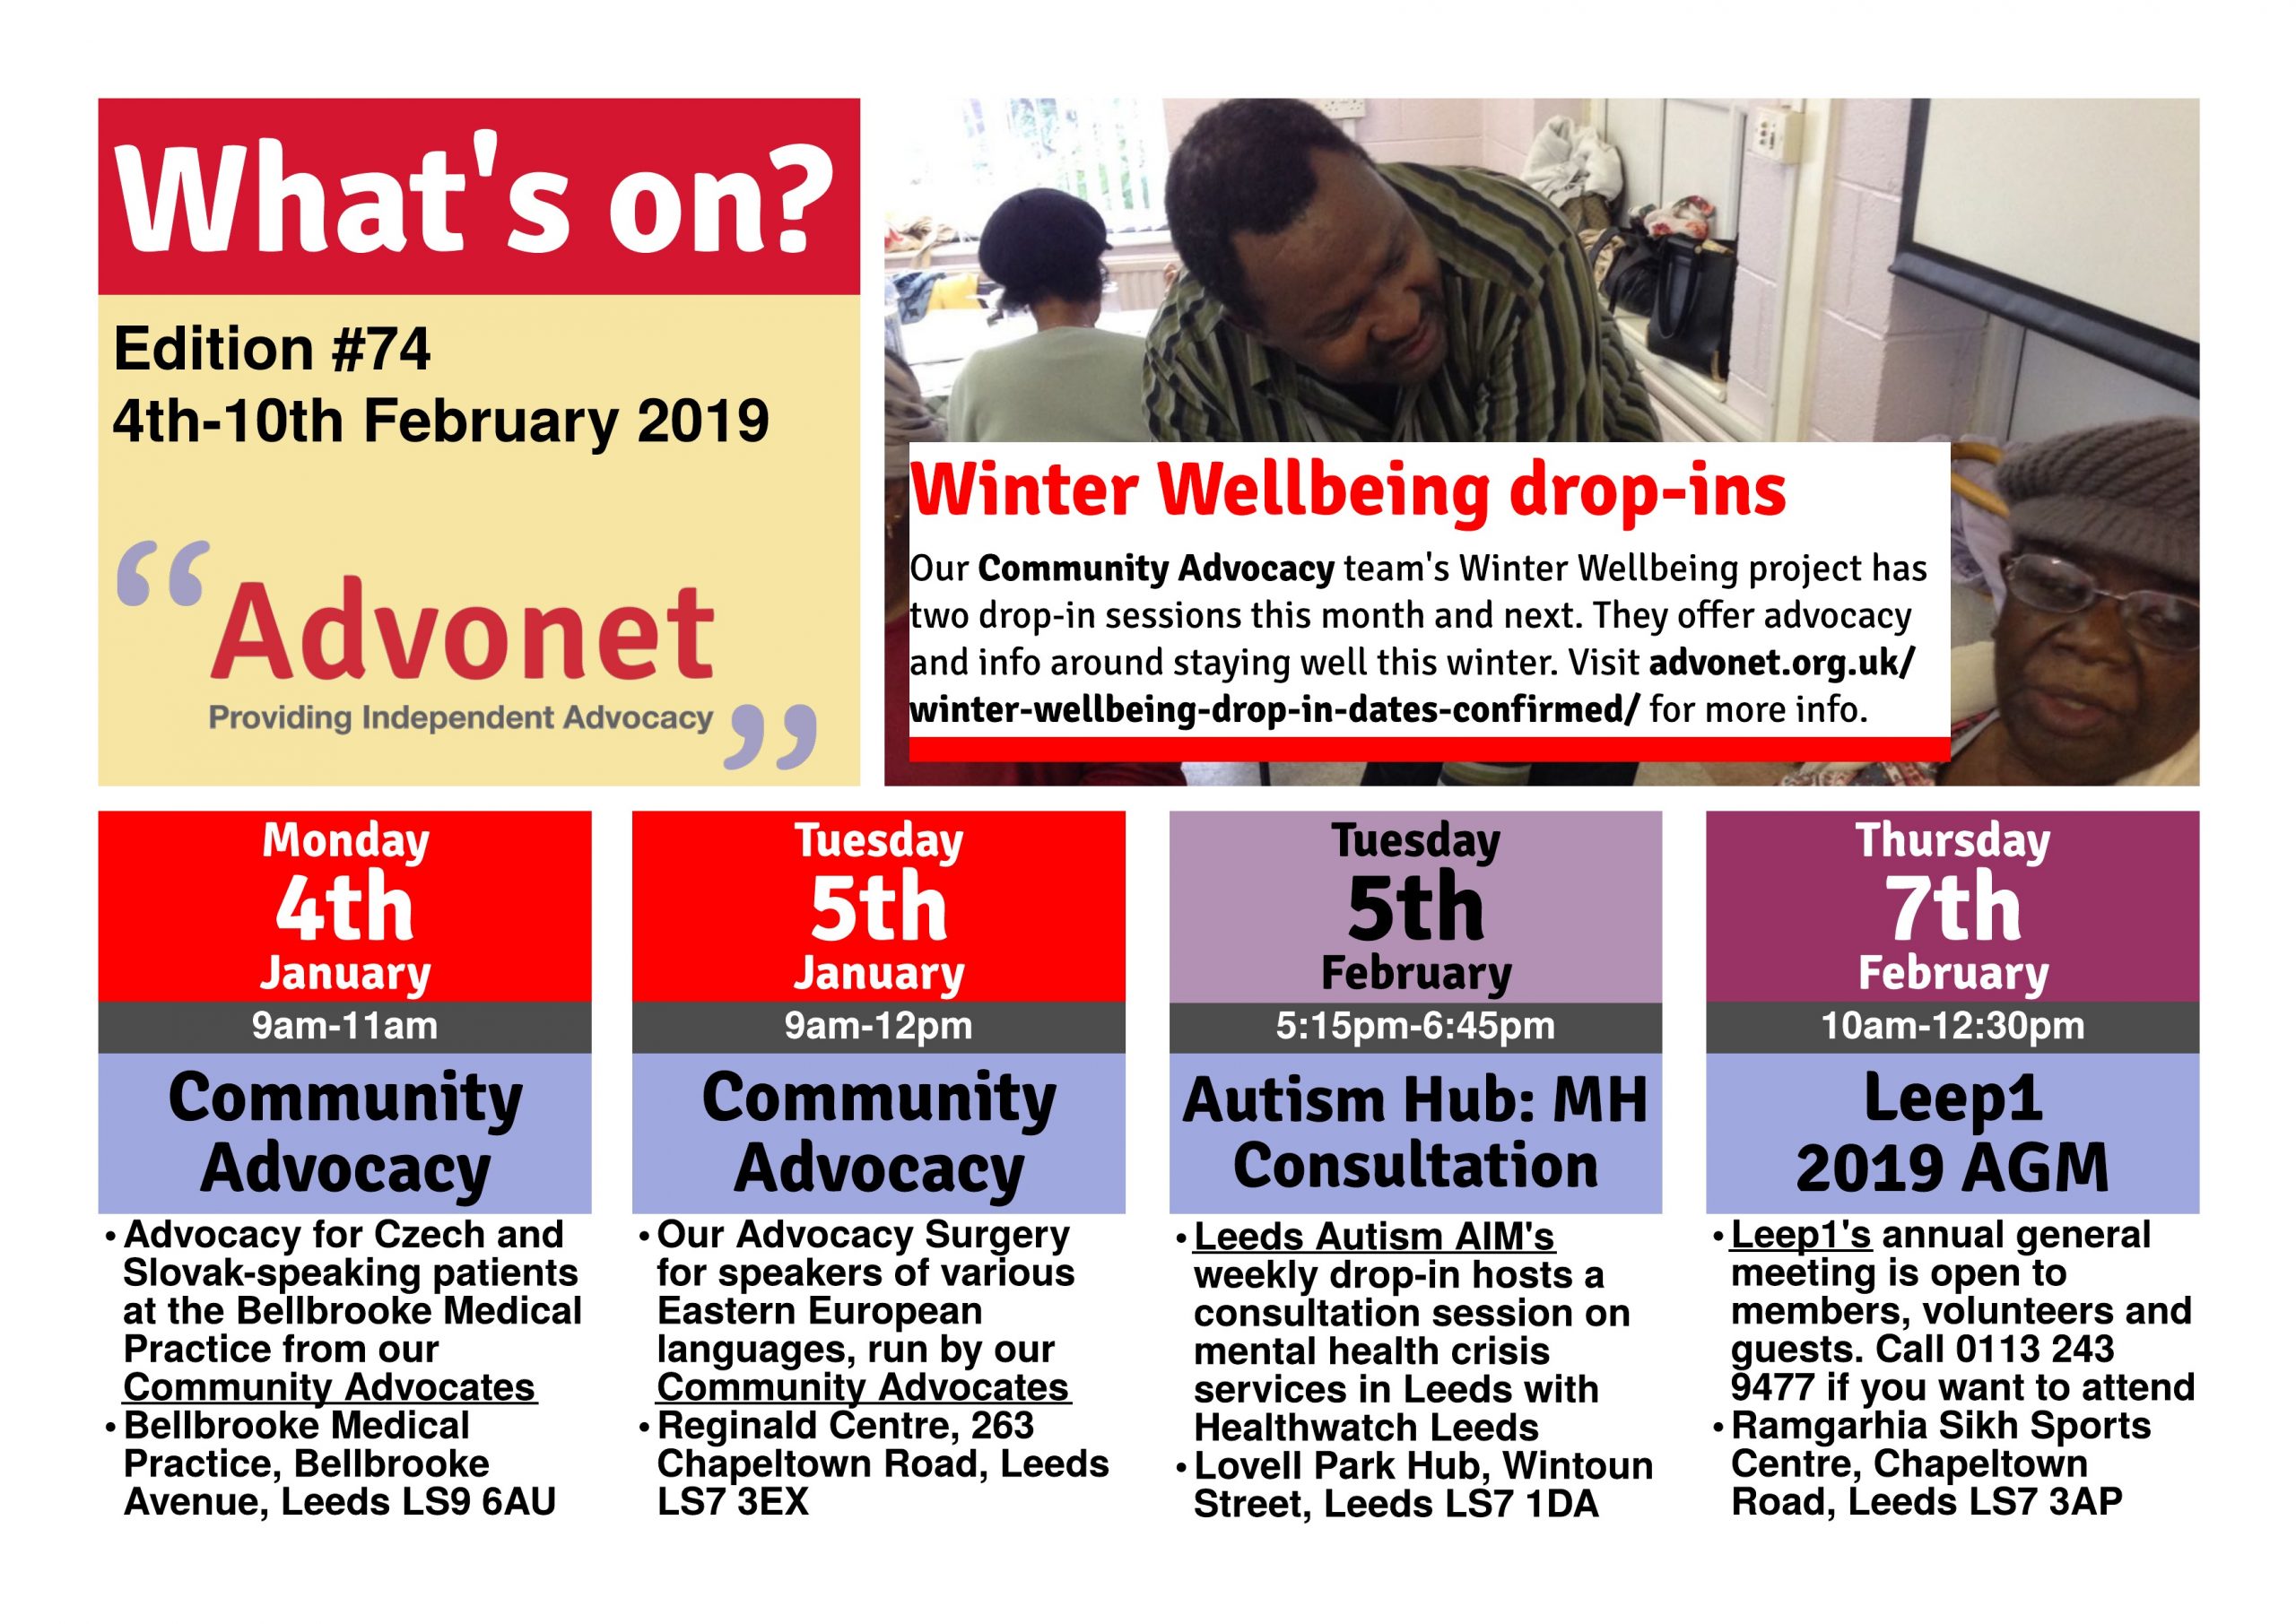 What's On - 4th-10th February 2019